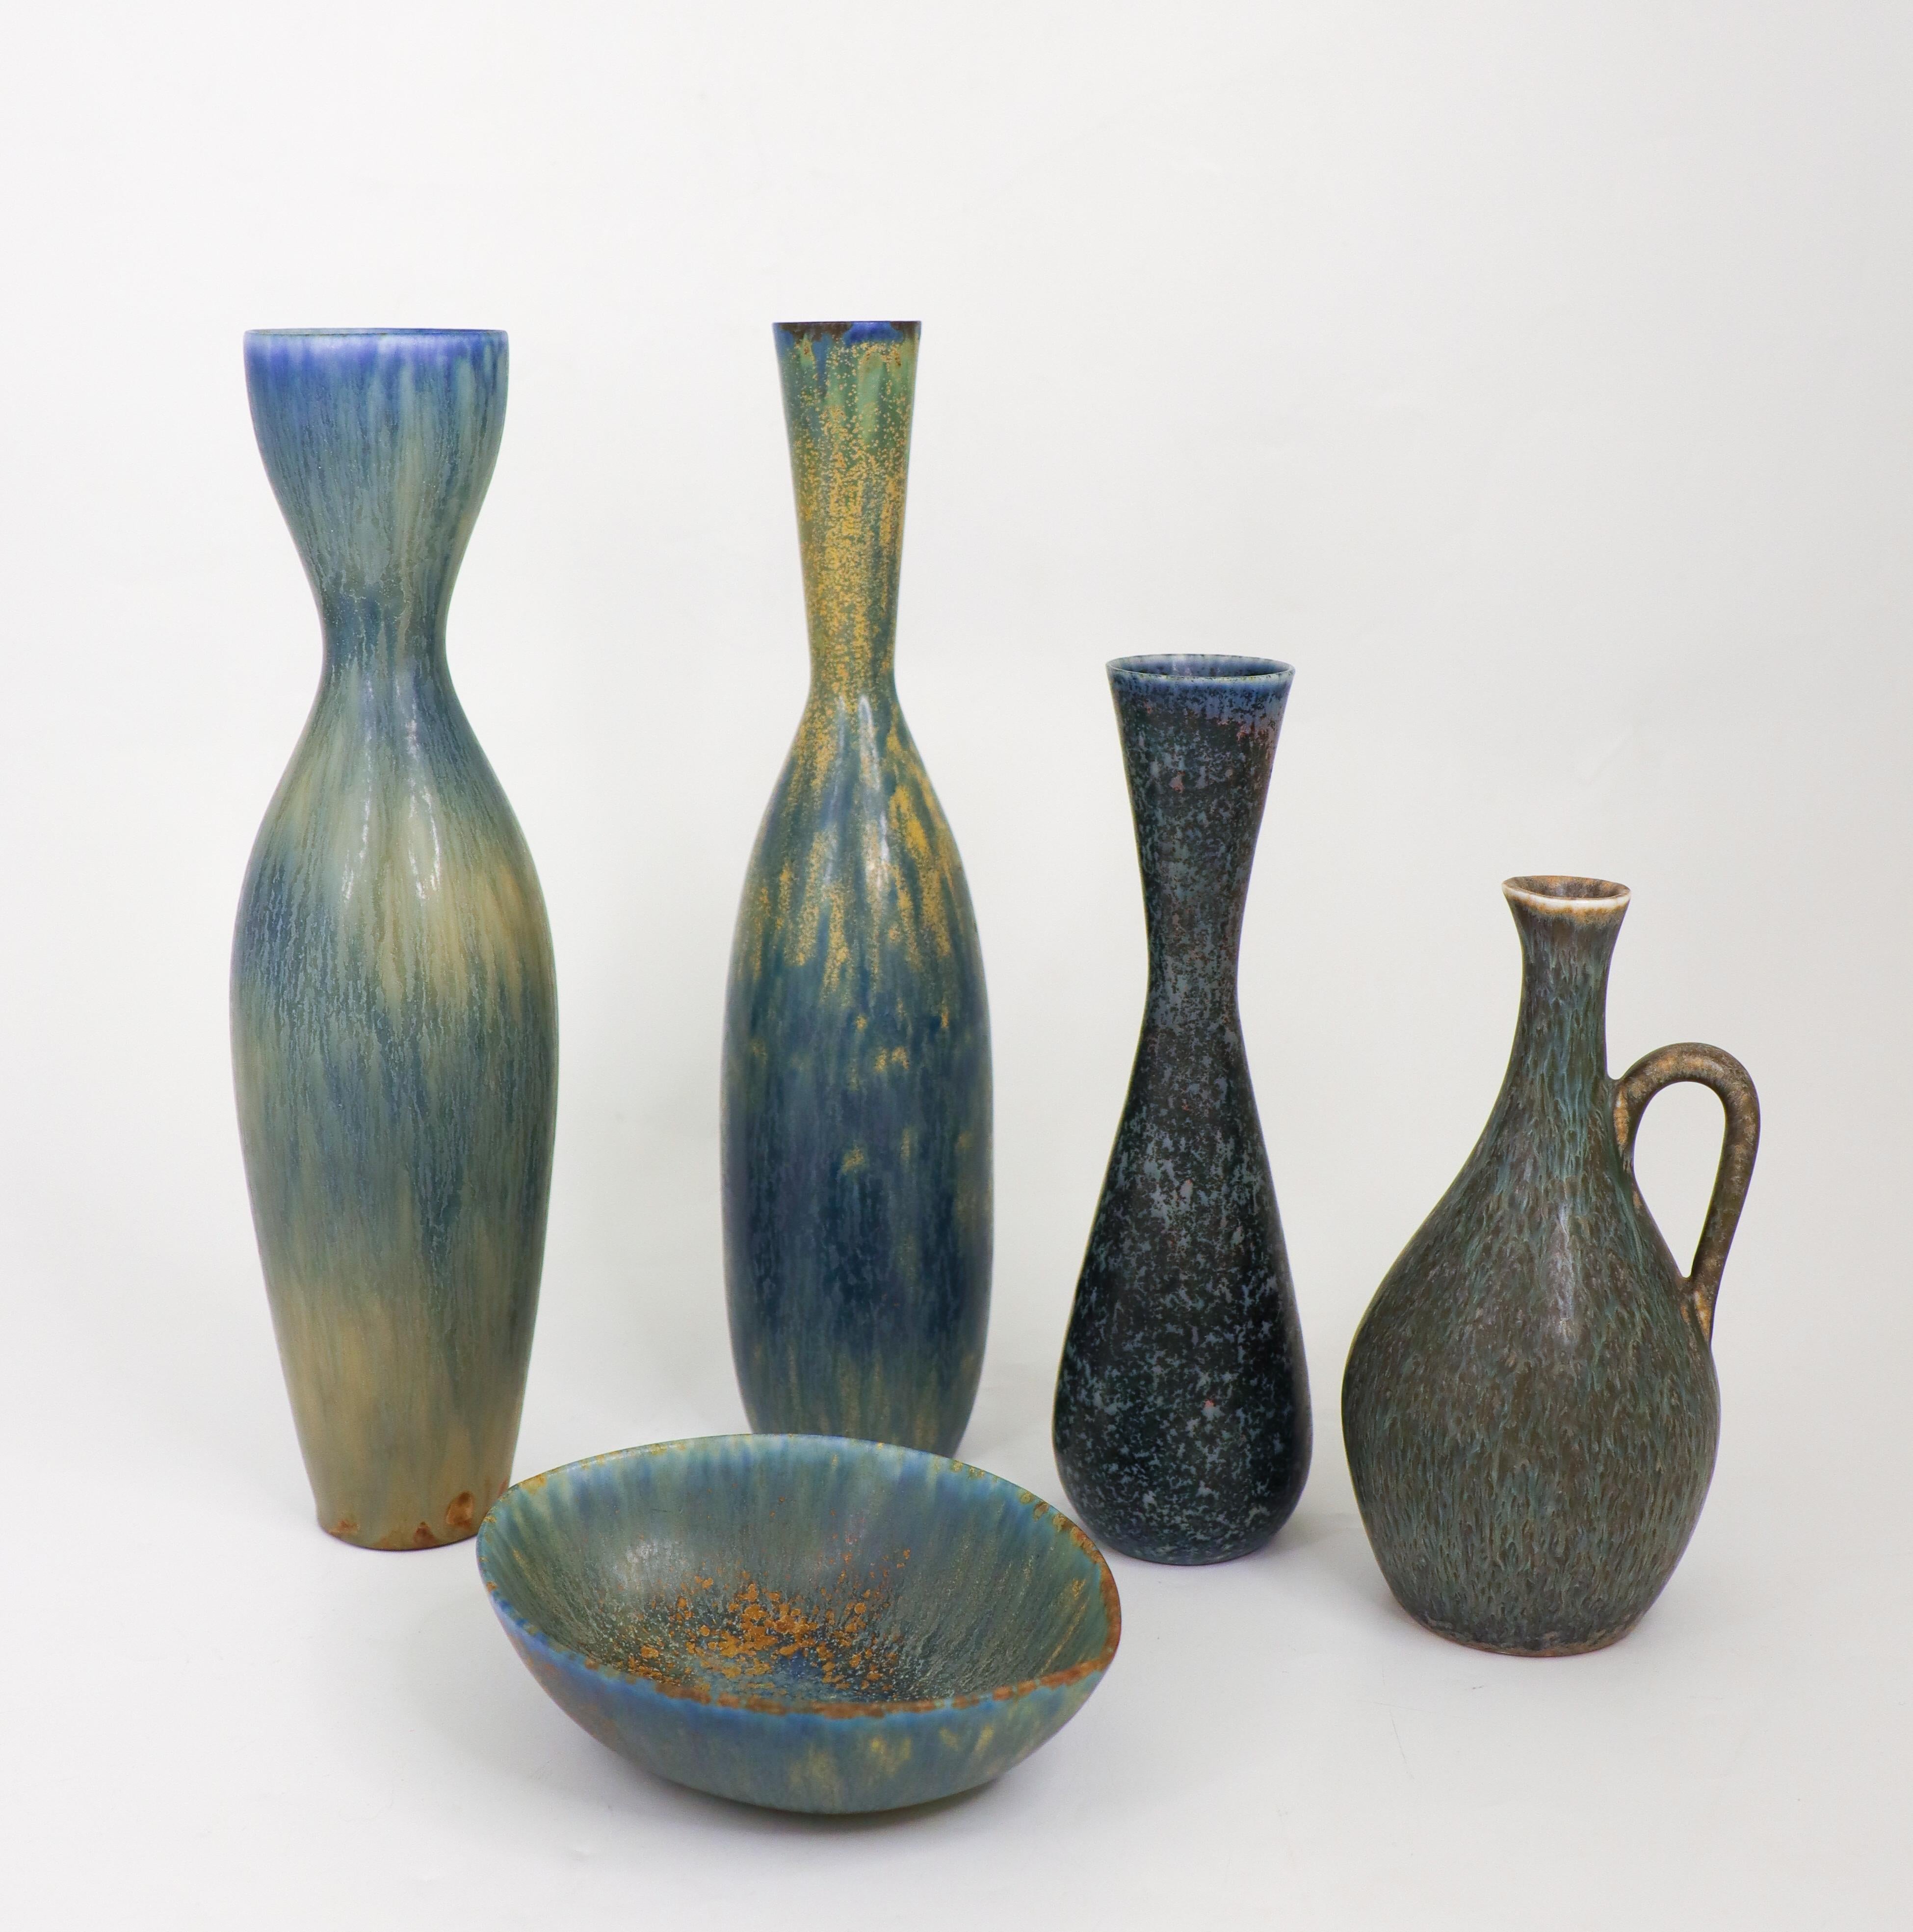 A group of four vases and a bowl with stunning glazes designed by Carl-Harry Stålhane at Rörstrand in the 1950s. The vases are between  16.5 - 28 cm high and in excellent condition. The bowl is 14 x 11 cm in diameter and they are all 1st quality